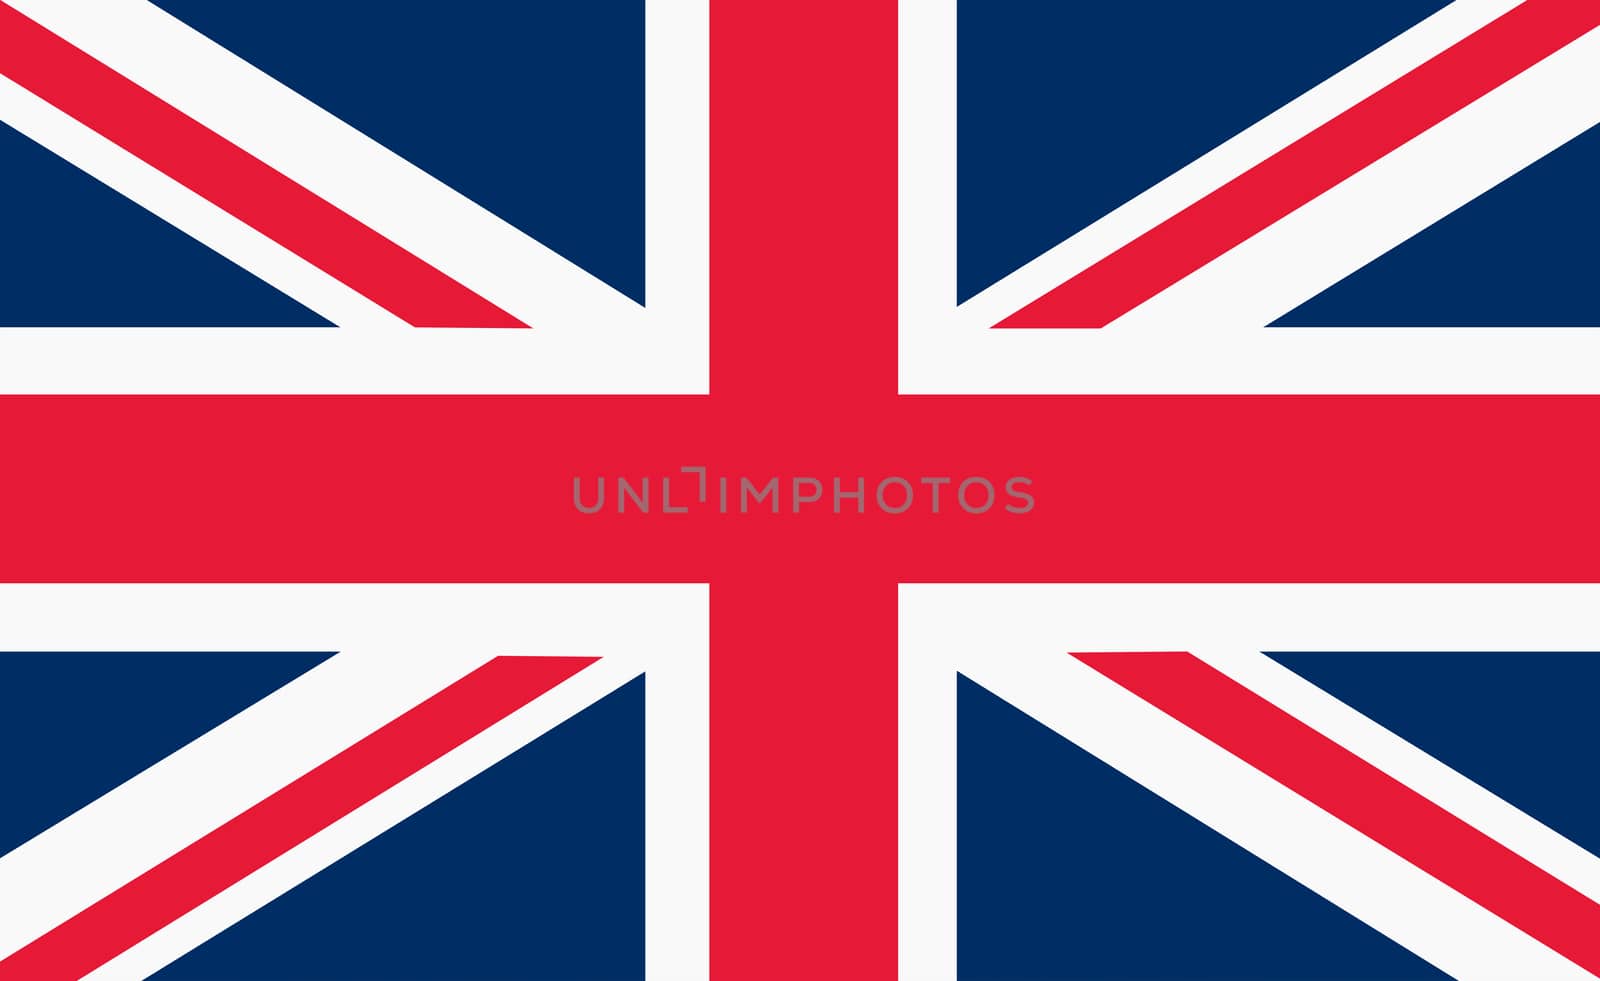 Flag of Great Britain Union Flag or Union Jack when at sea by VivacityImages